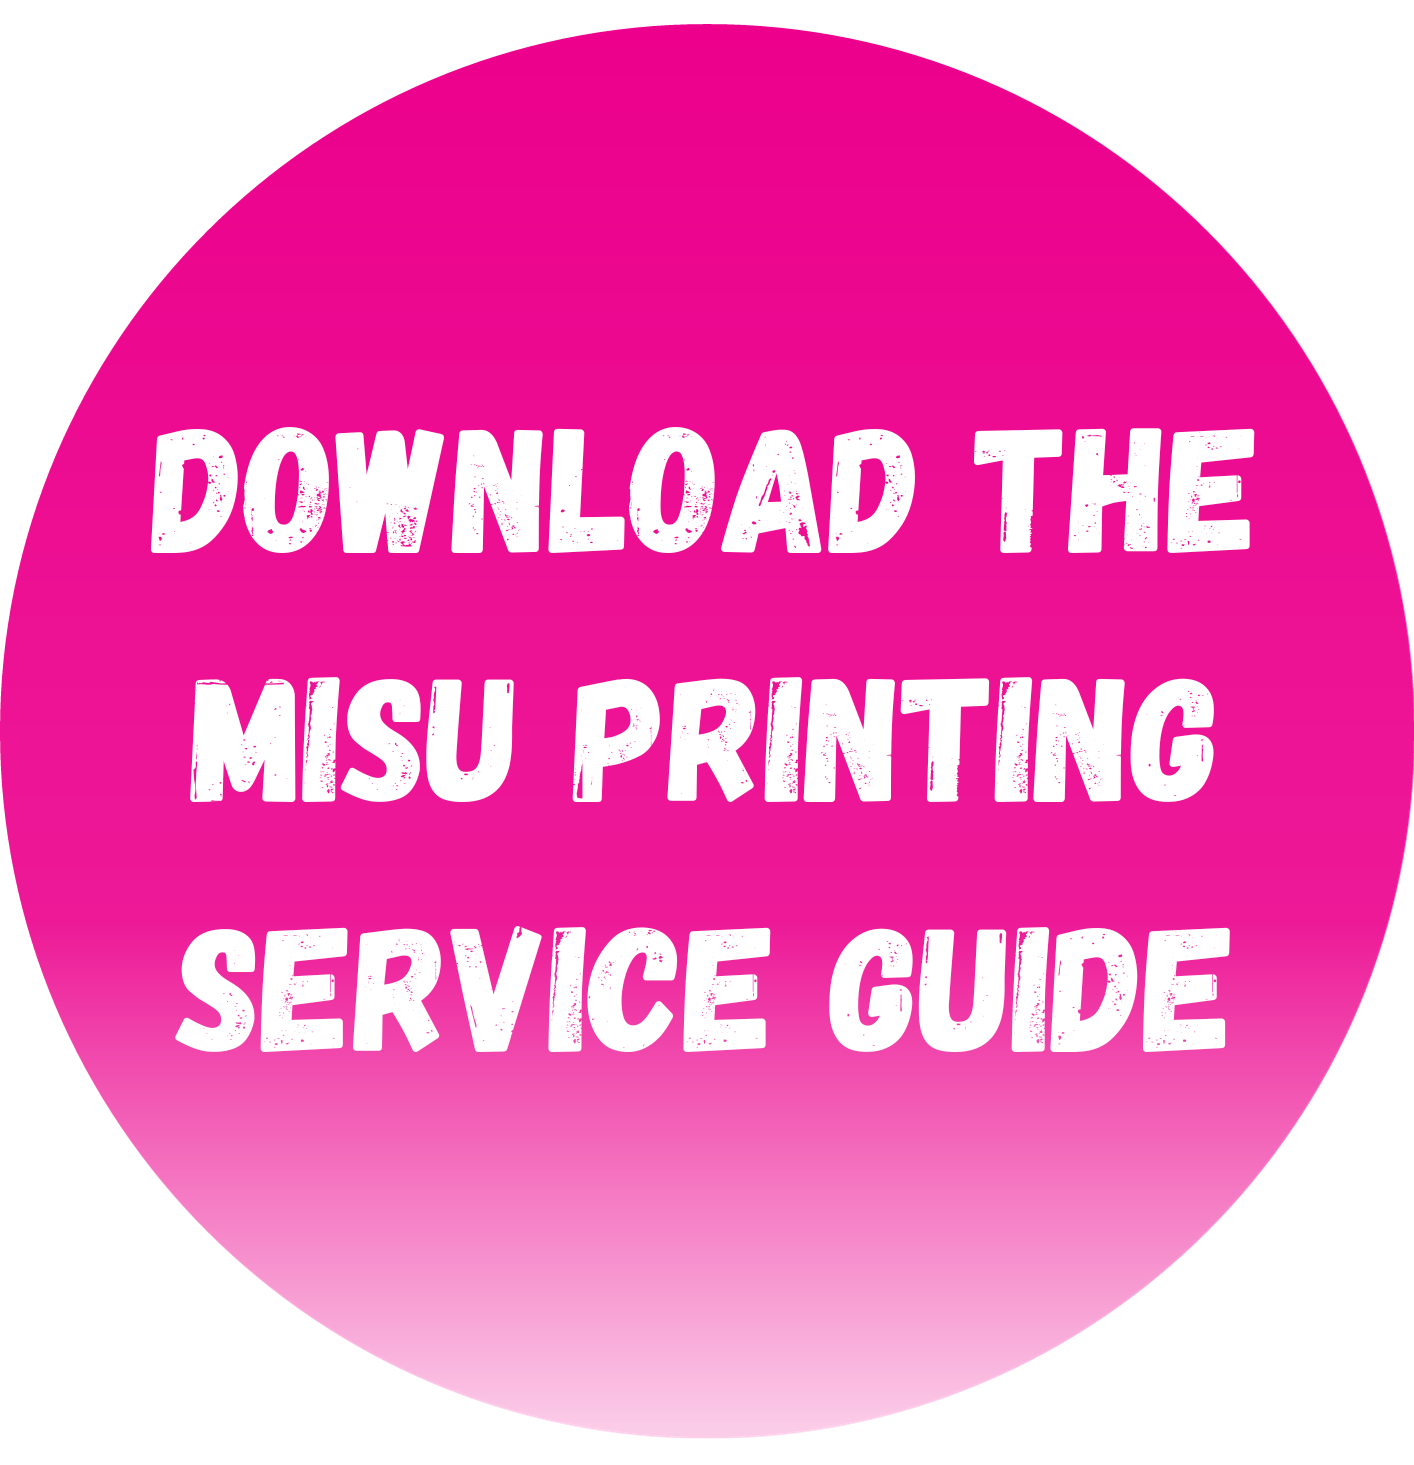 Printing Service Guide